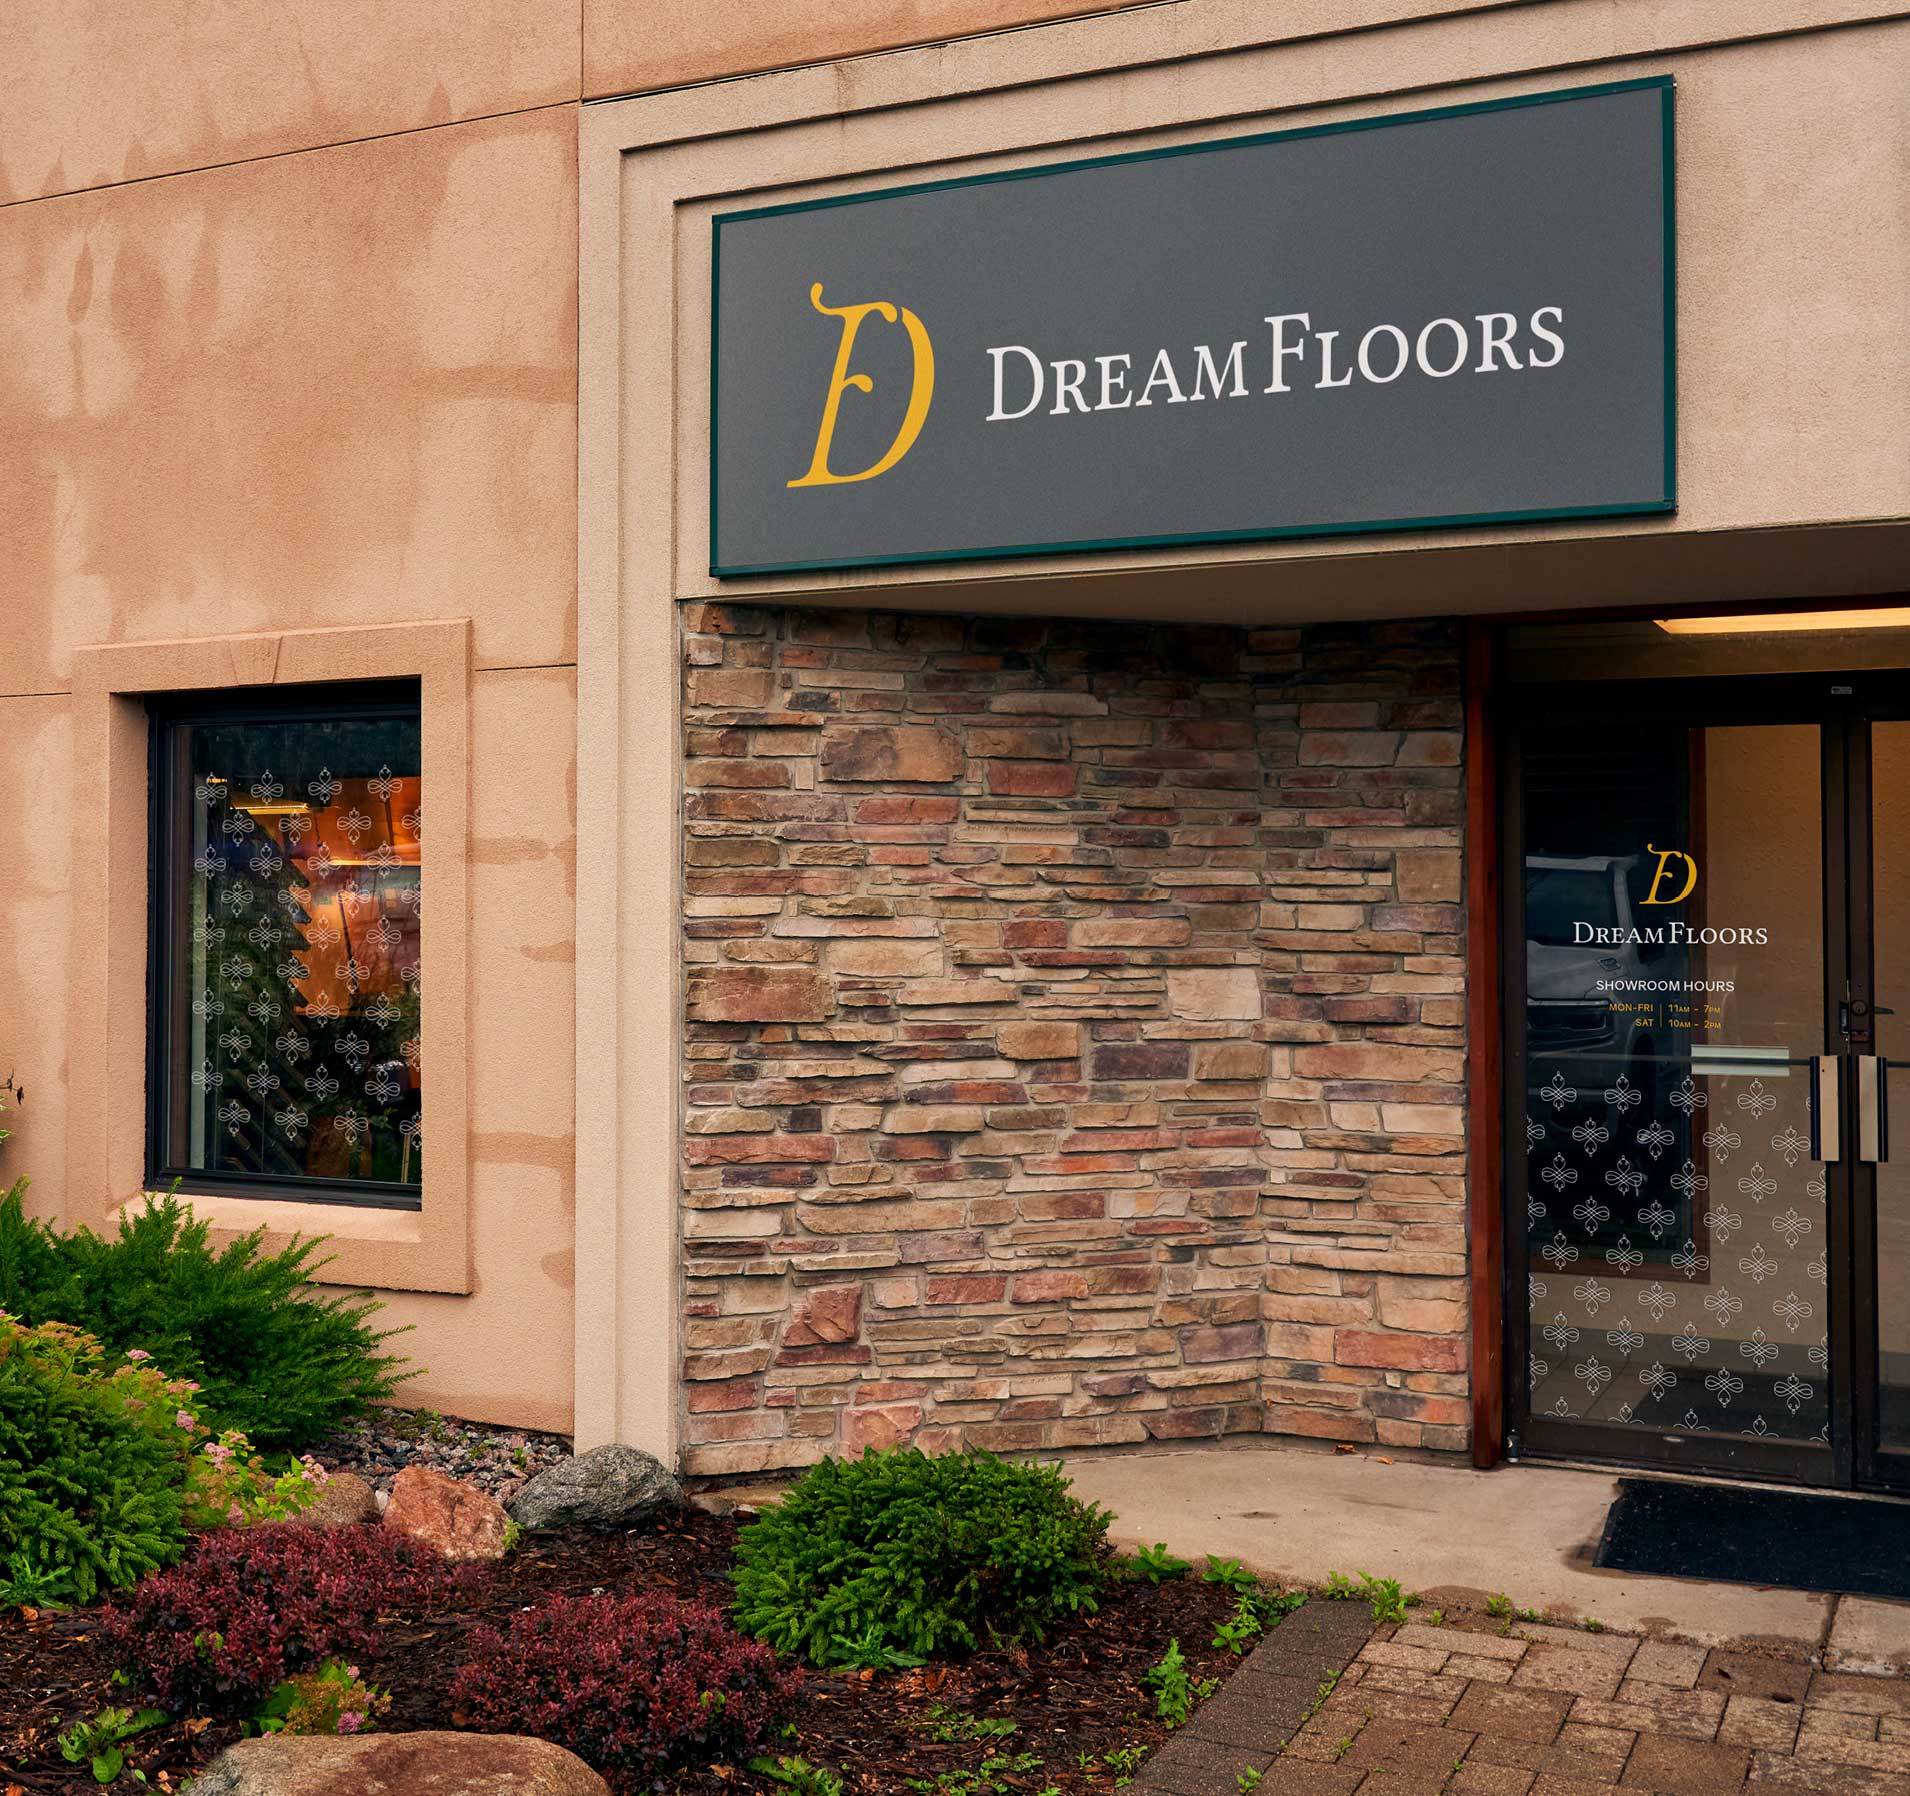 We designed signage and window graphics for the exterior of the Dream Floors showroom.